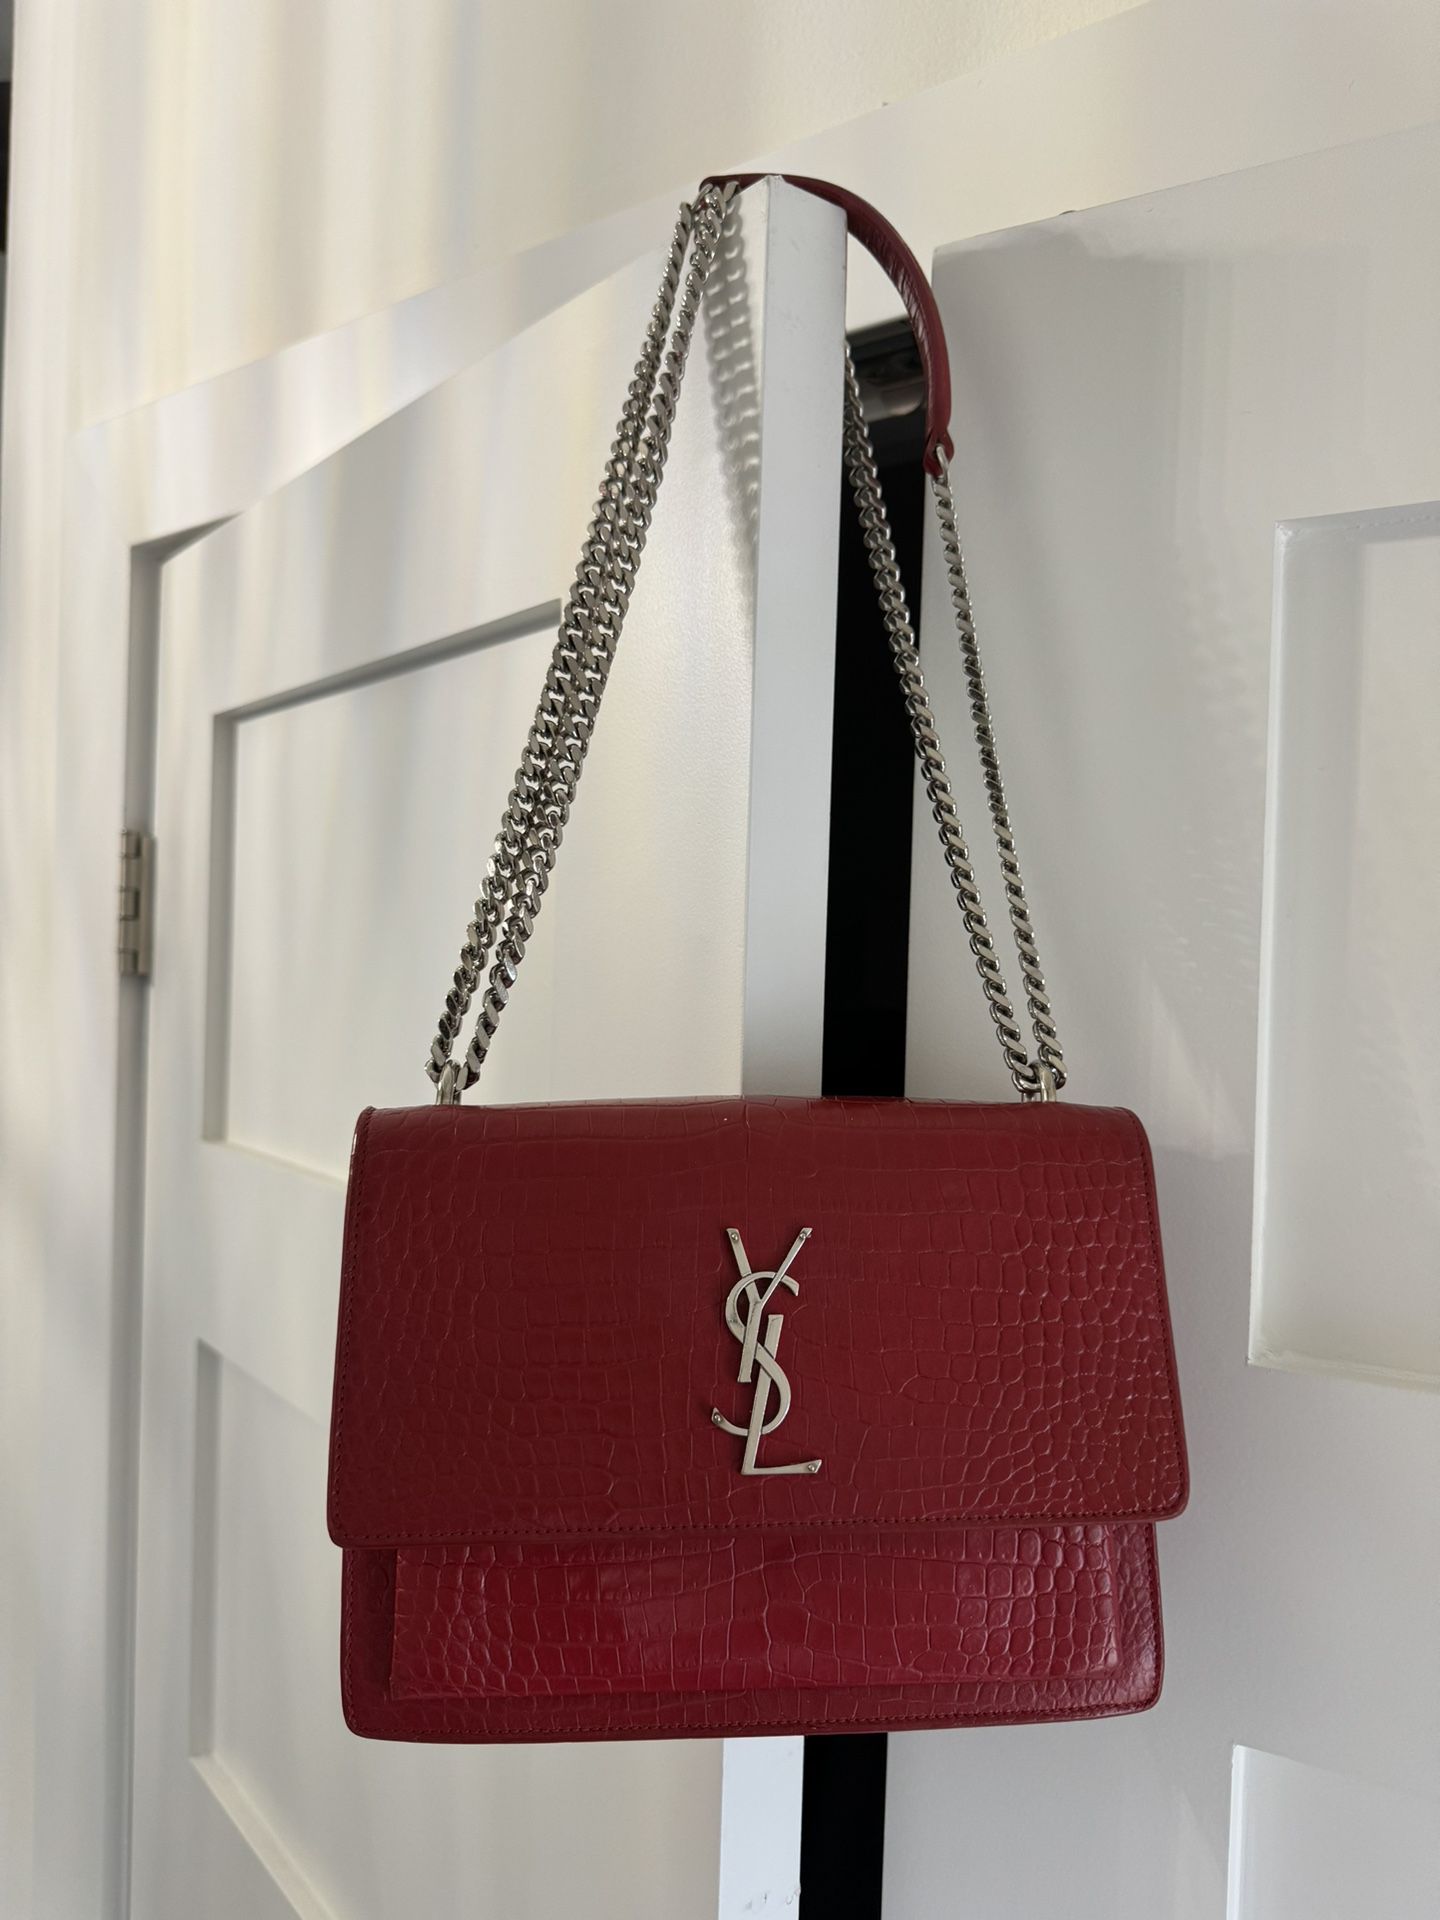 YSL sunset authentic 